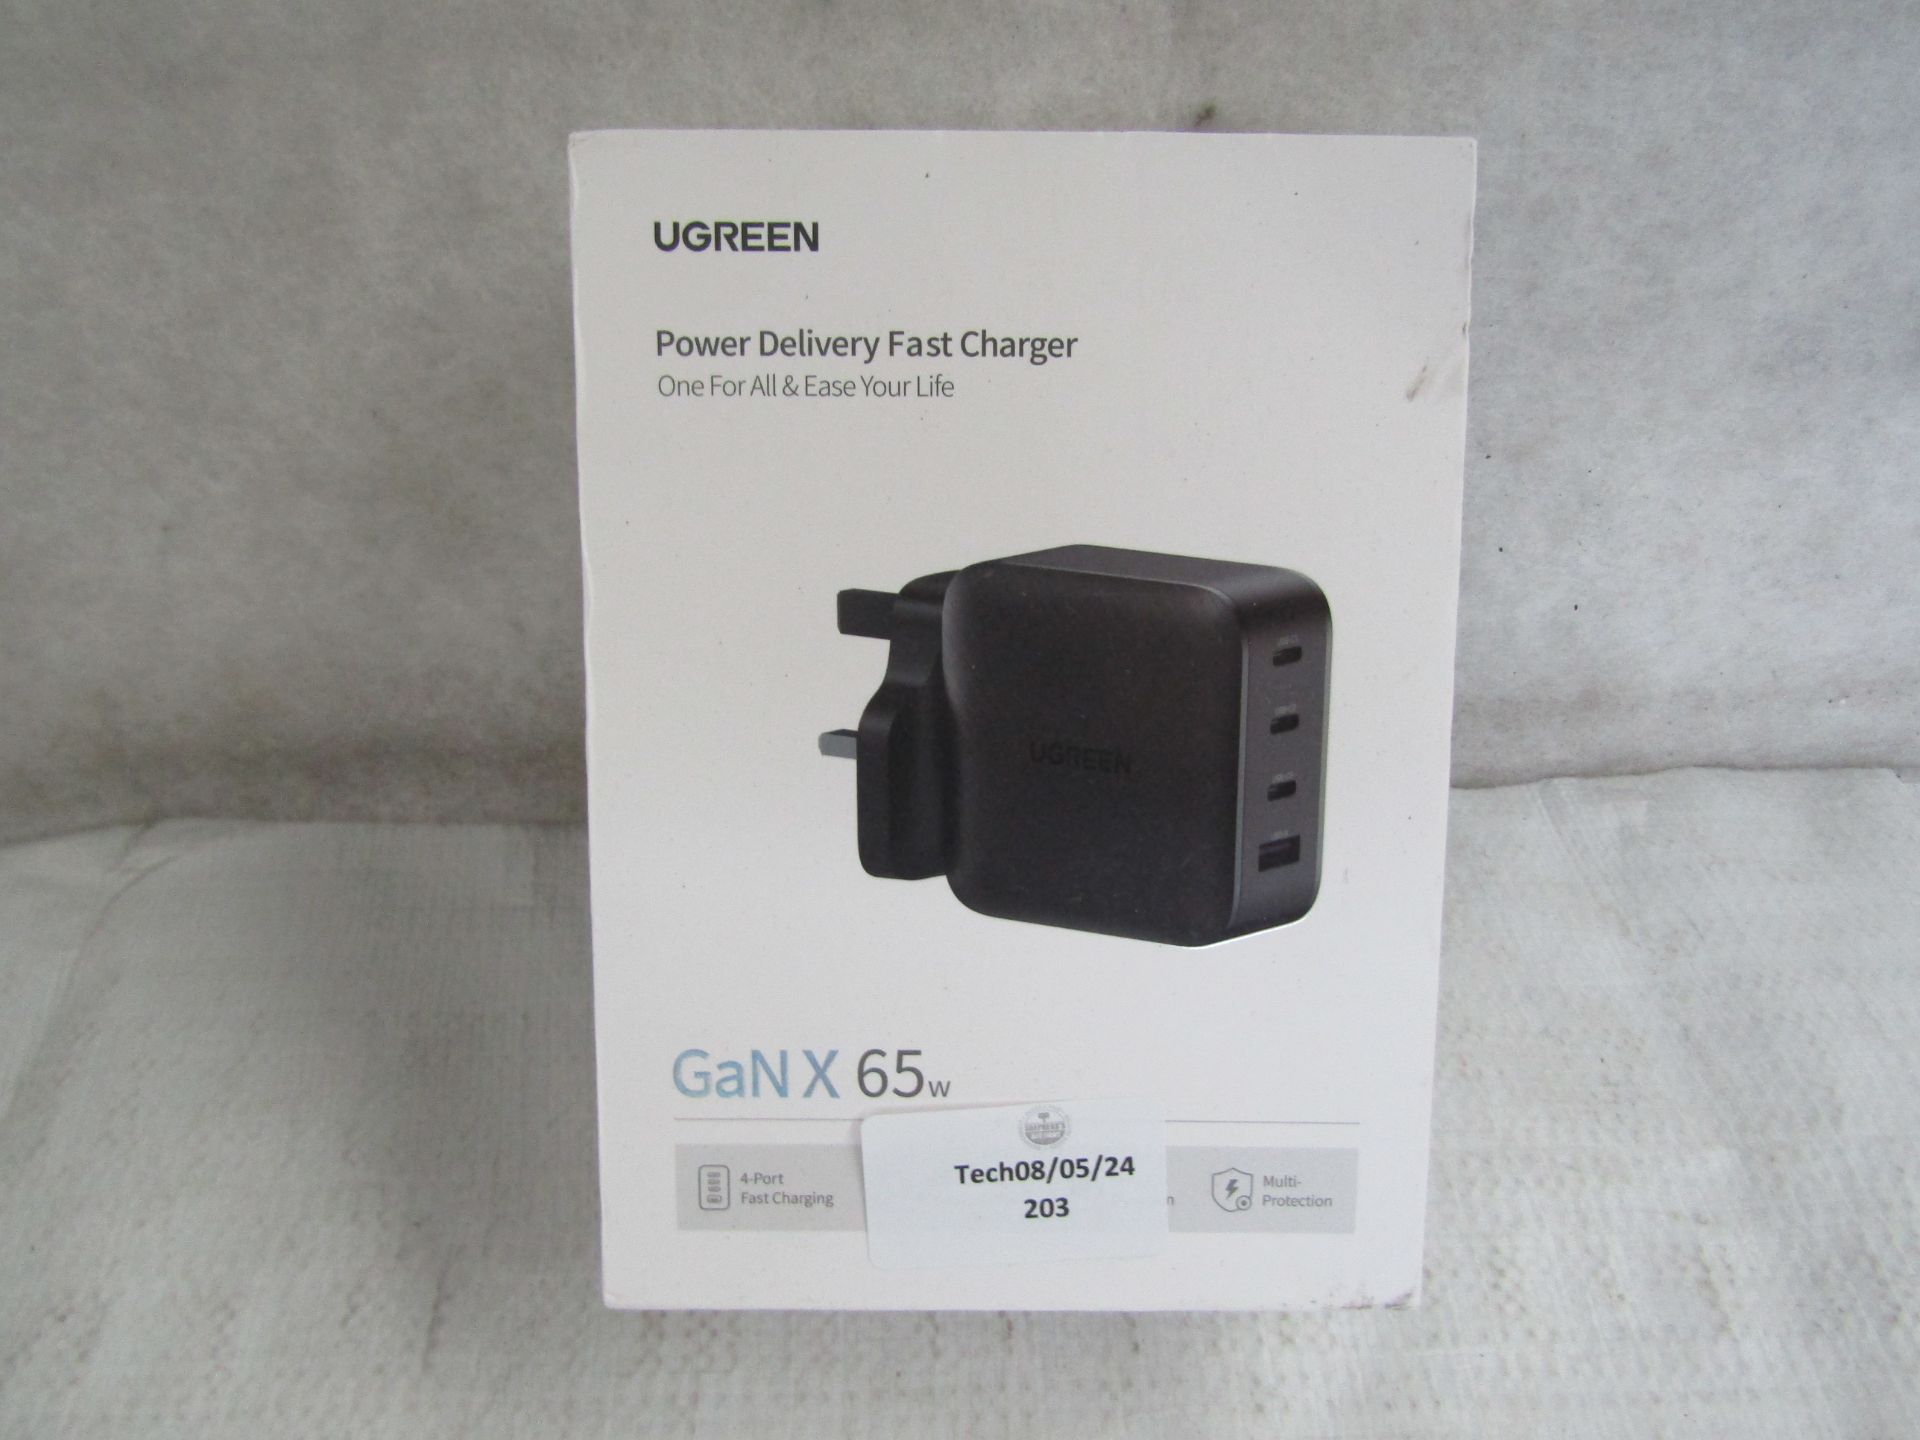 Ugreen Power Delivery Fast Charger, Ganx65, Unchecked & Boxed.